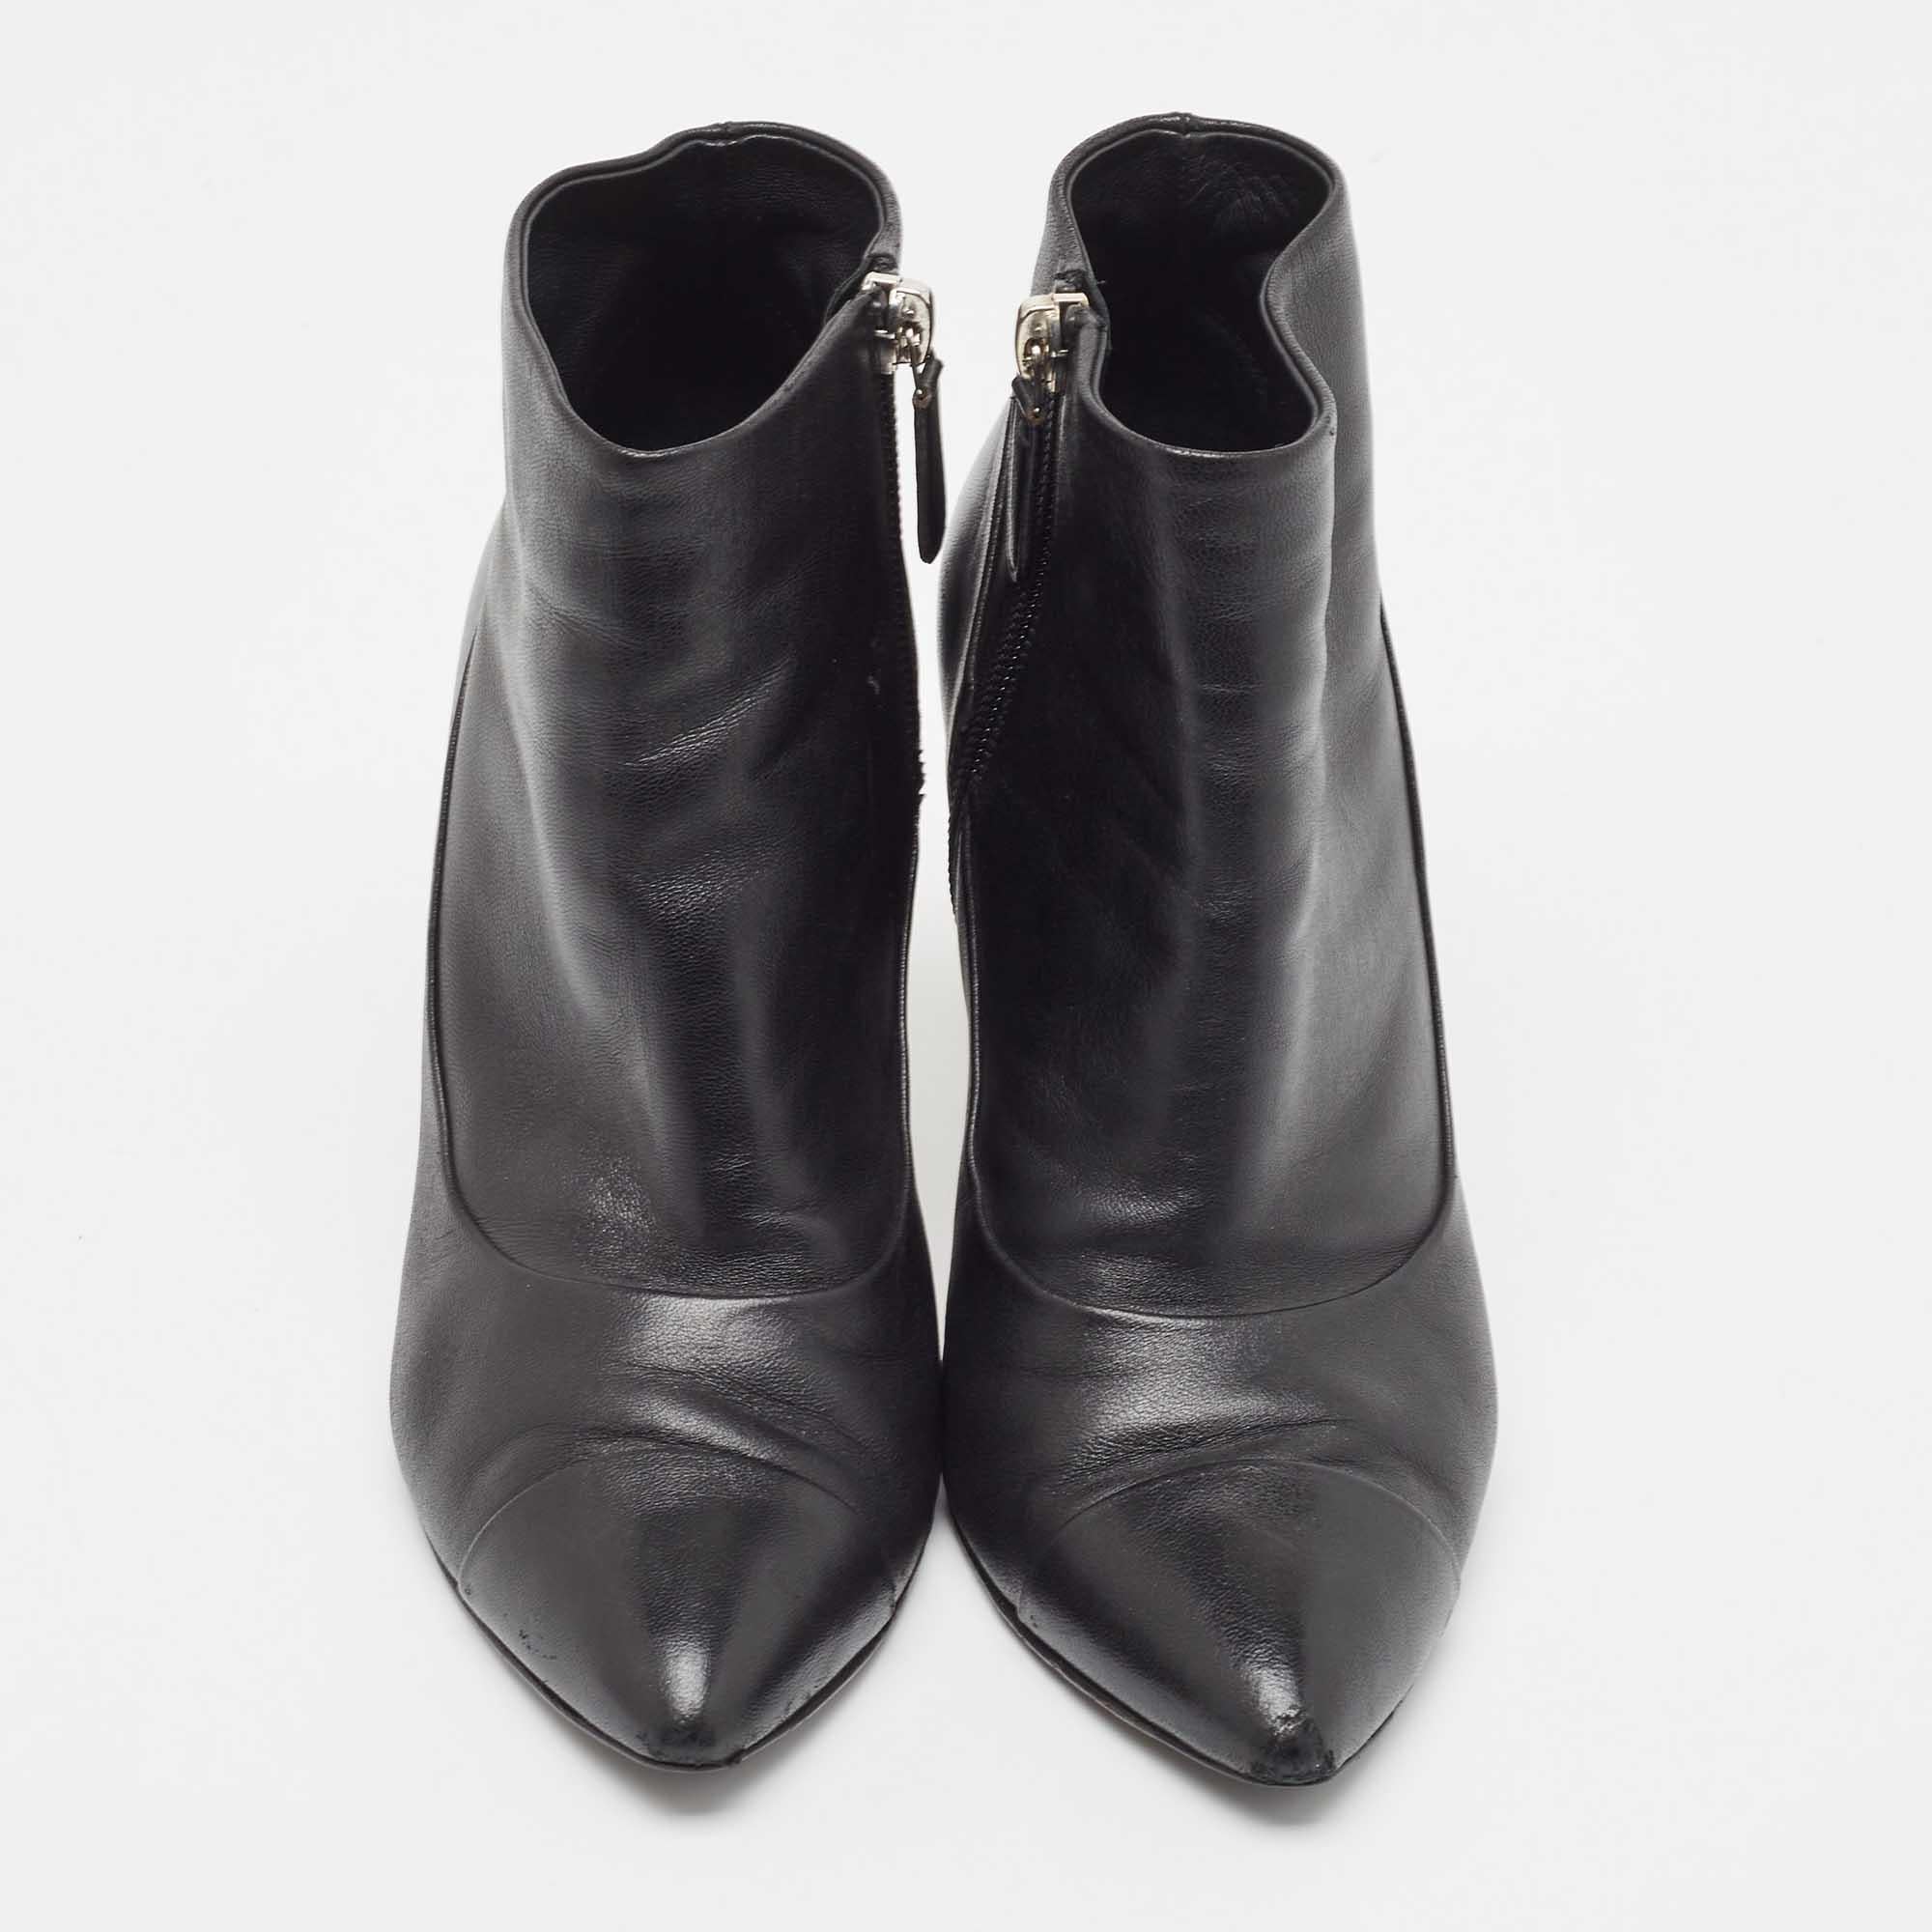 Chanel Black Leather Ankle Boots Size 36.5 In Good Condition For Sale In Dubai, Al Qouz 2